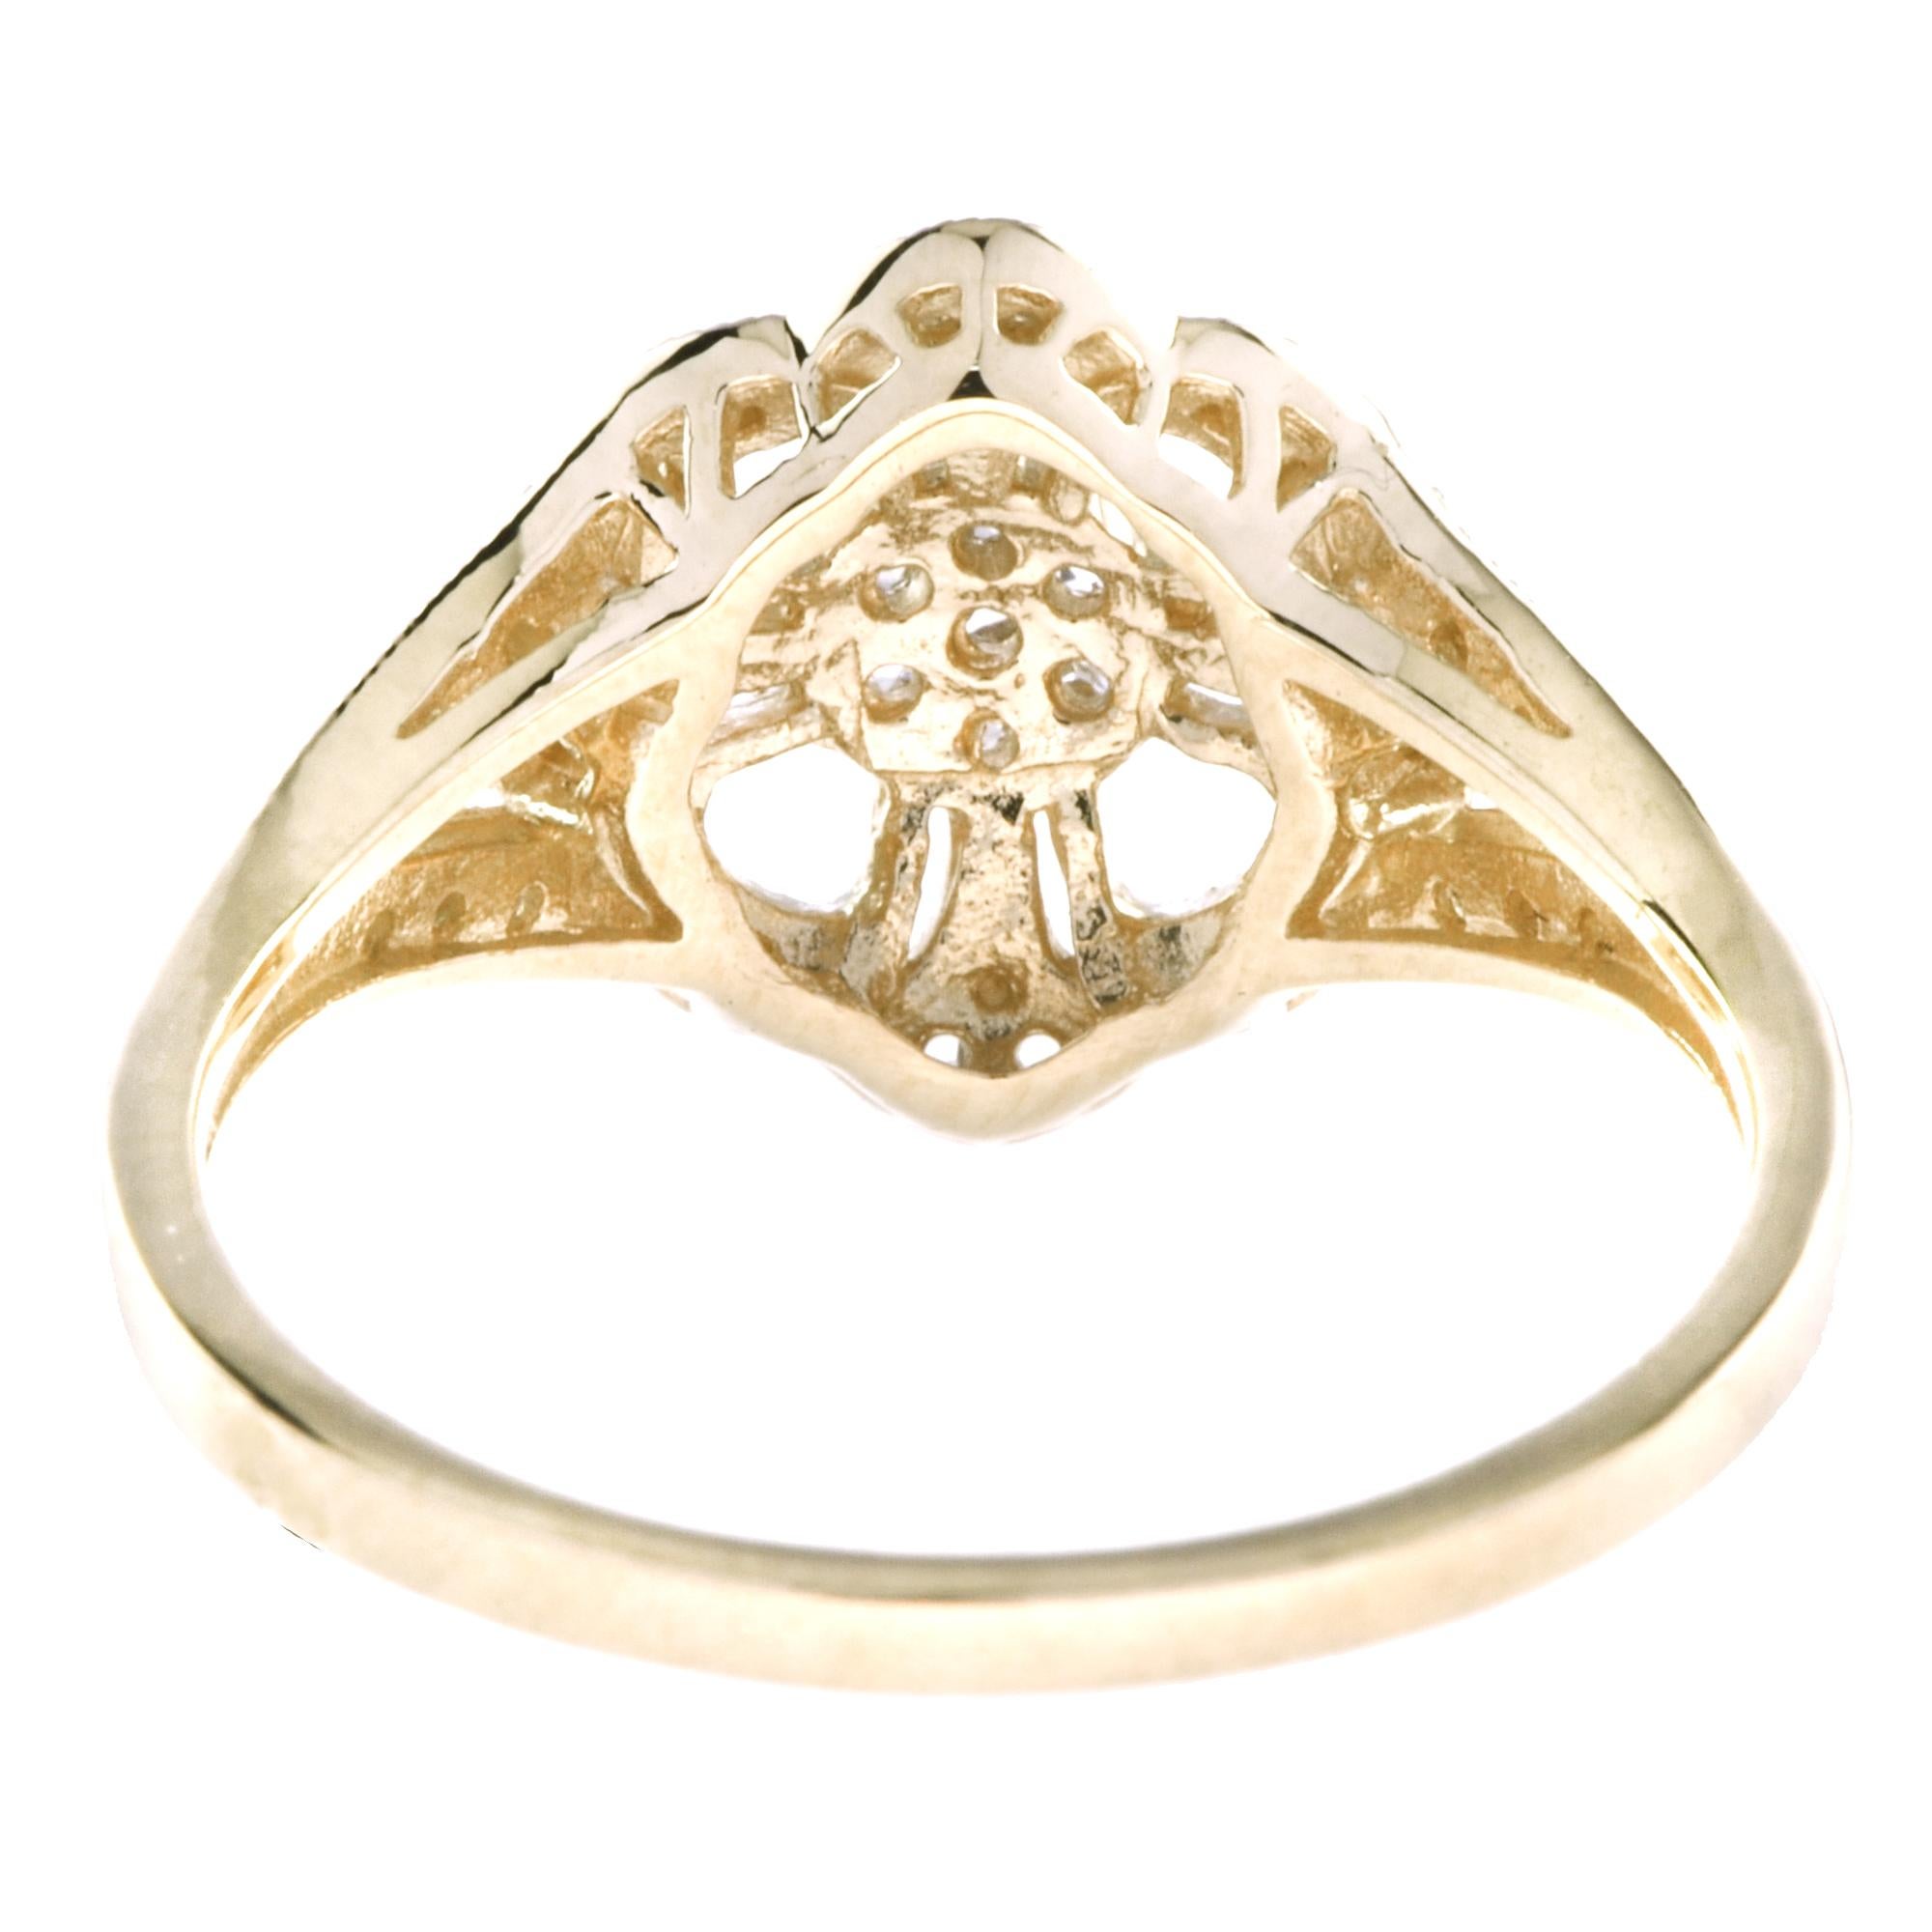 For Sale:  Vintage Style Diamond Flower Ring in 18K Yellow Gold 5